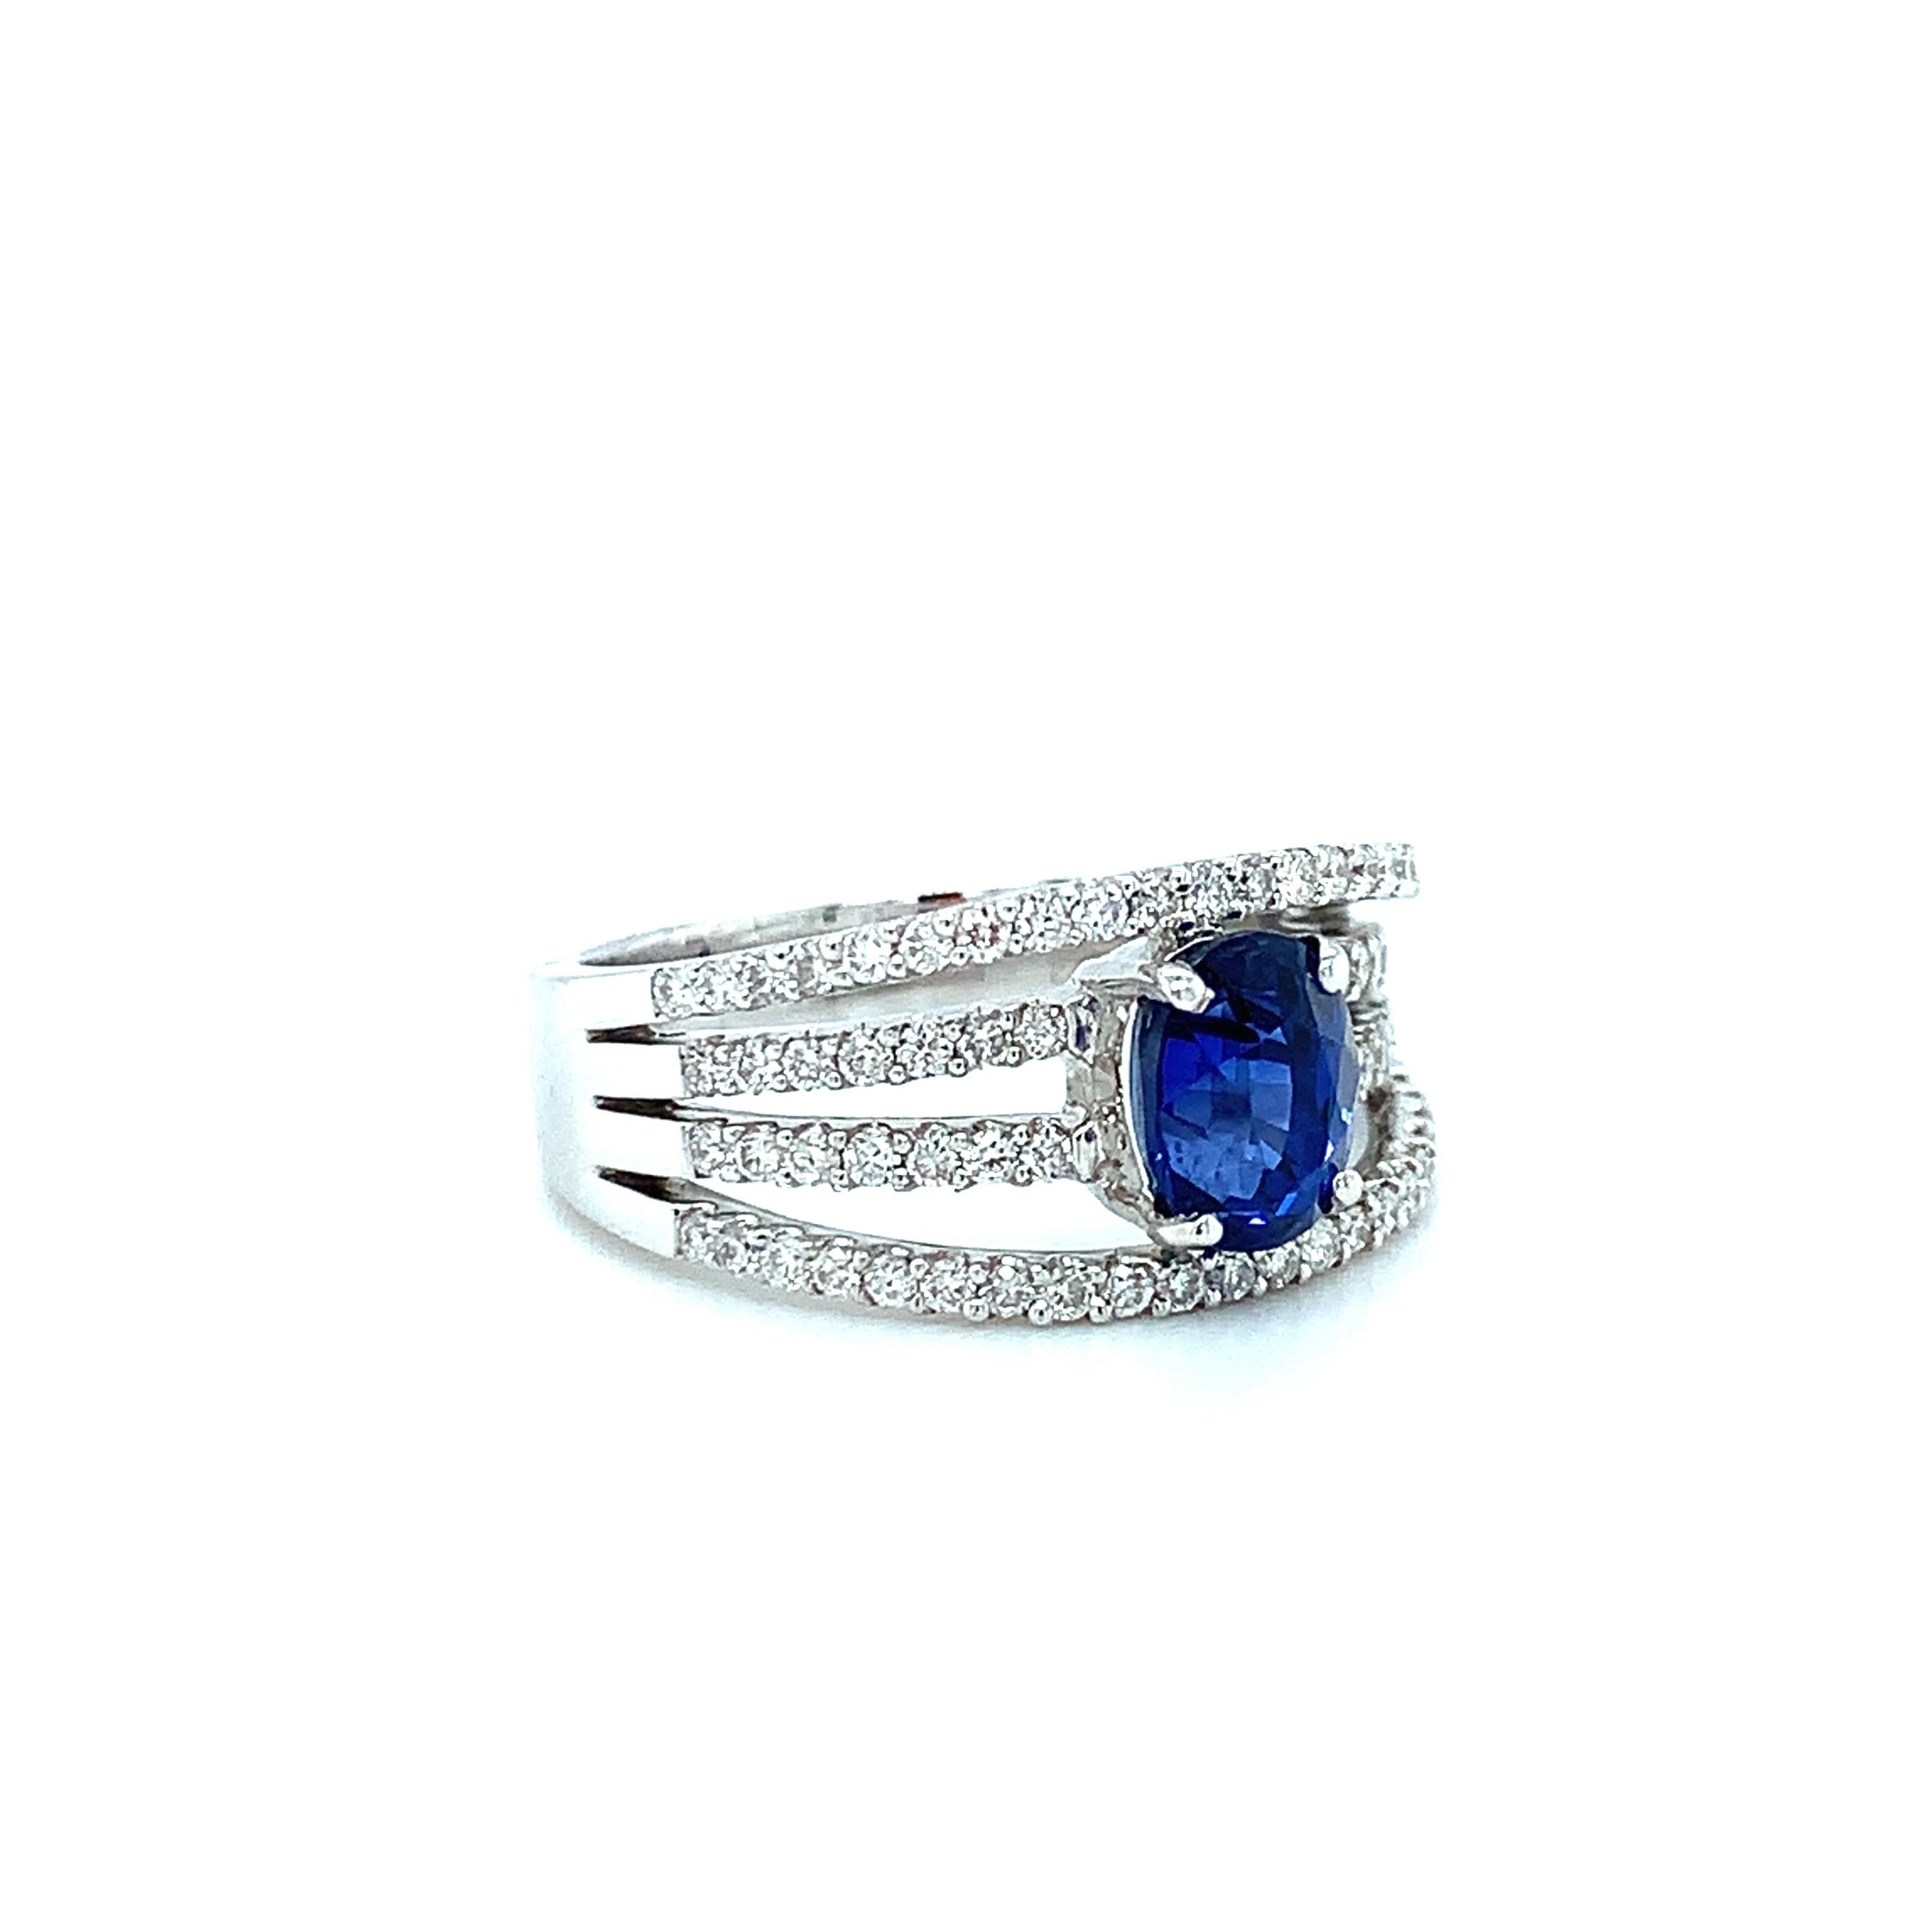 Oval Cut Royal Blue Sapphire and 4-Row Diamond Engagement Ring in White Gold, 1.56 Carat  For Sale